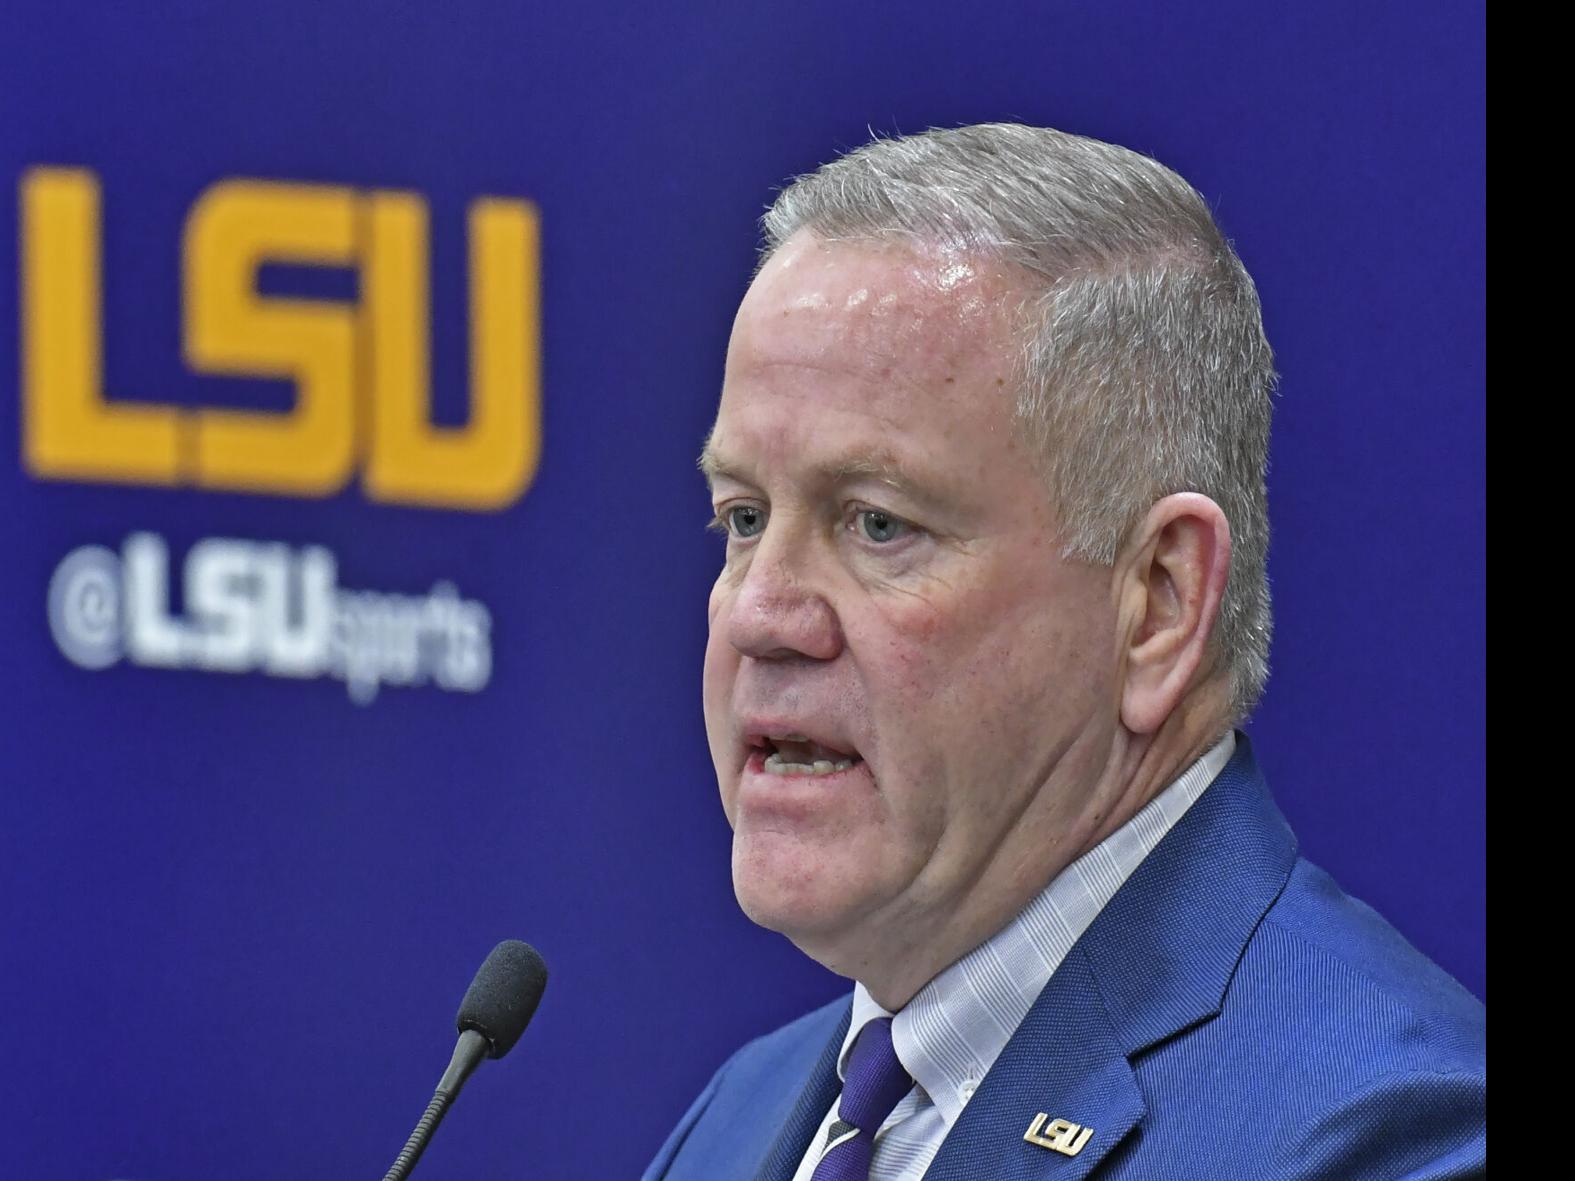 Scott Rabalais: The goal for Brian Kelly at SEC Media Days? That he and LSU  are taken seriously | LSU | theadvocate.com